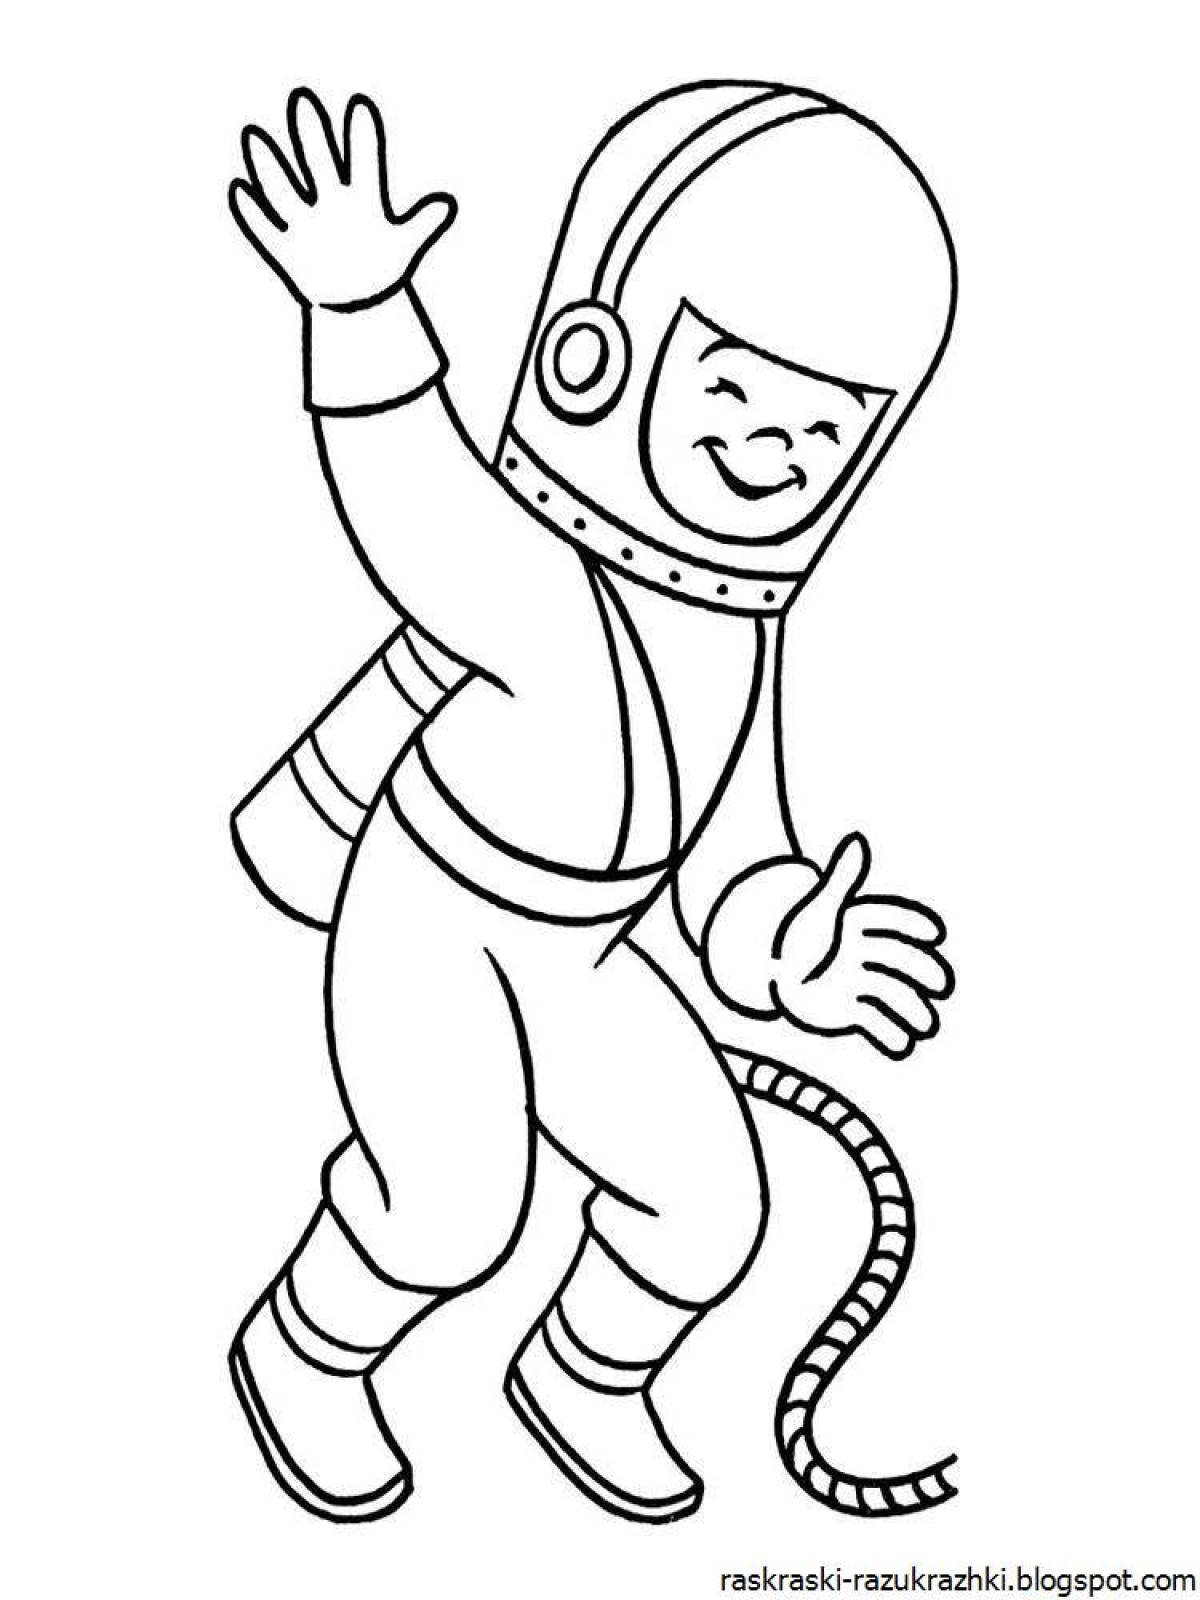 Awesome astronaut coloring page